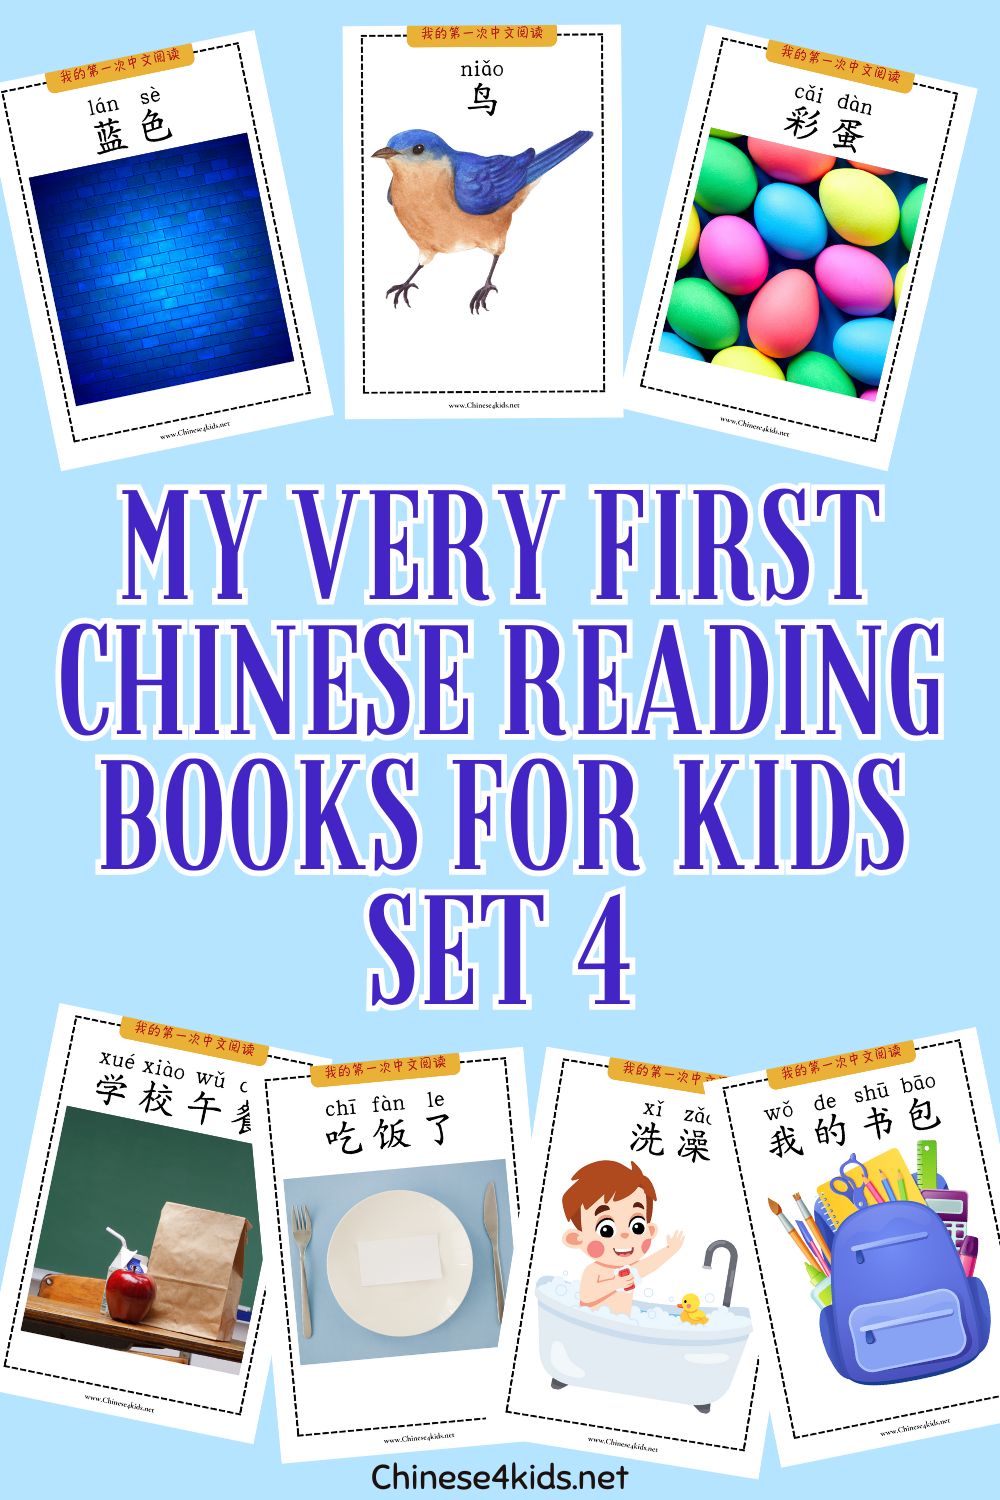 7 My Very First Chinese Reading set 4